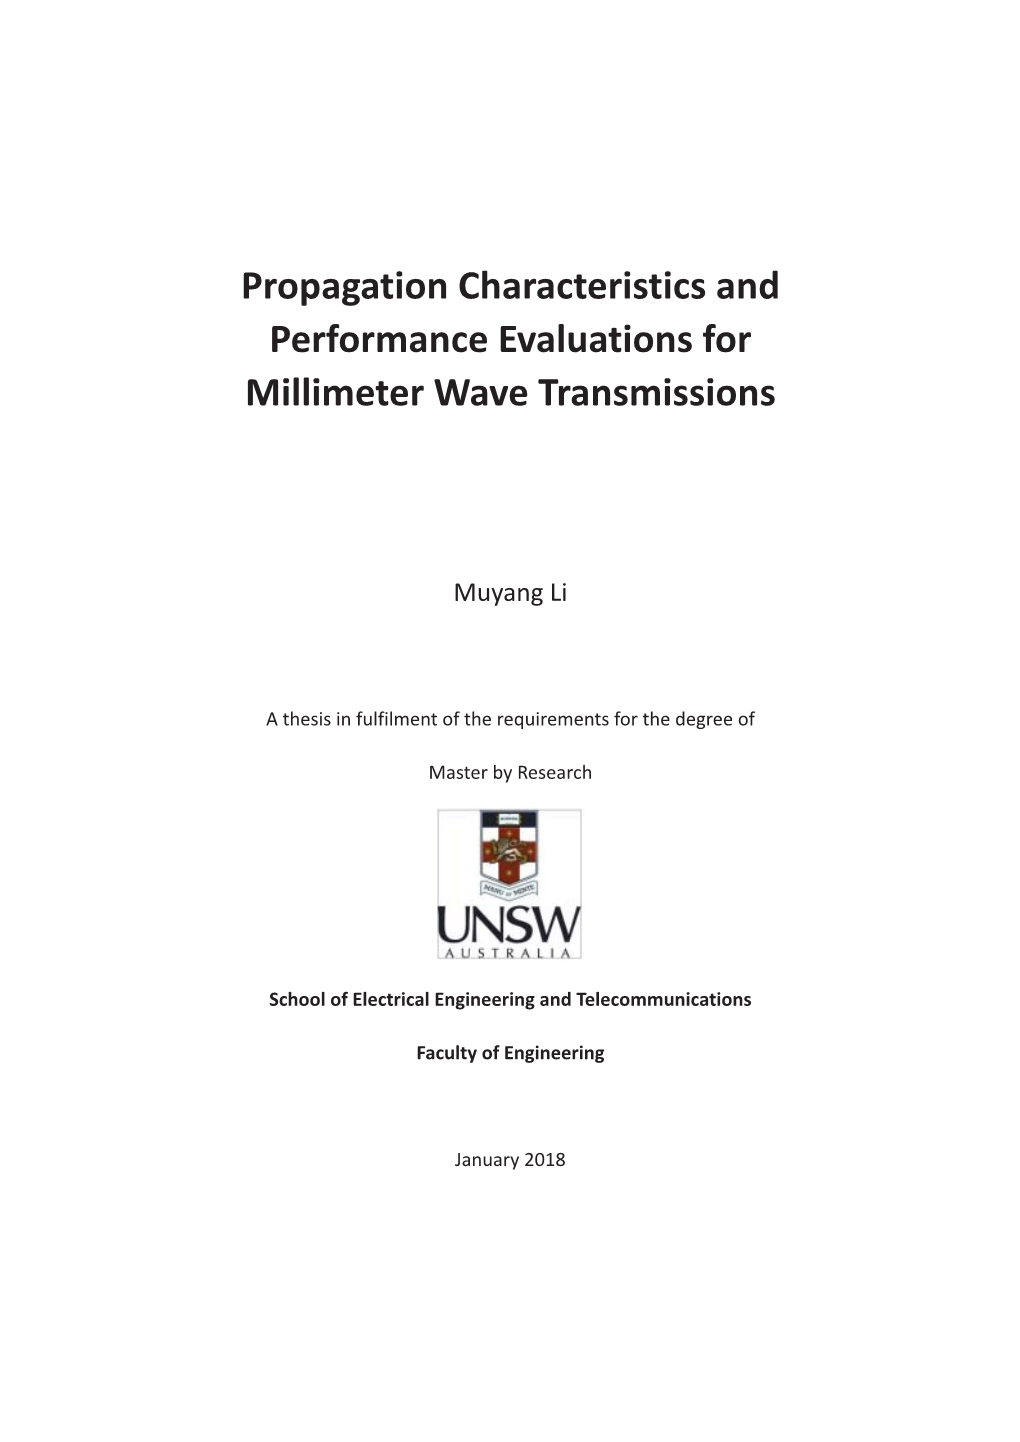 Propagation Characteristics and Performance Evaluations for Millimeter Wave Transmissions